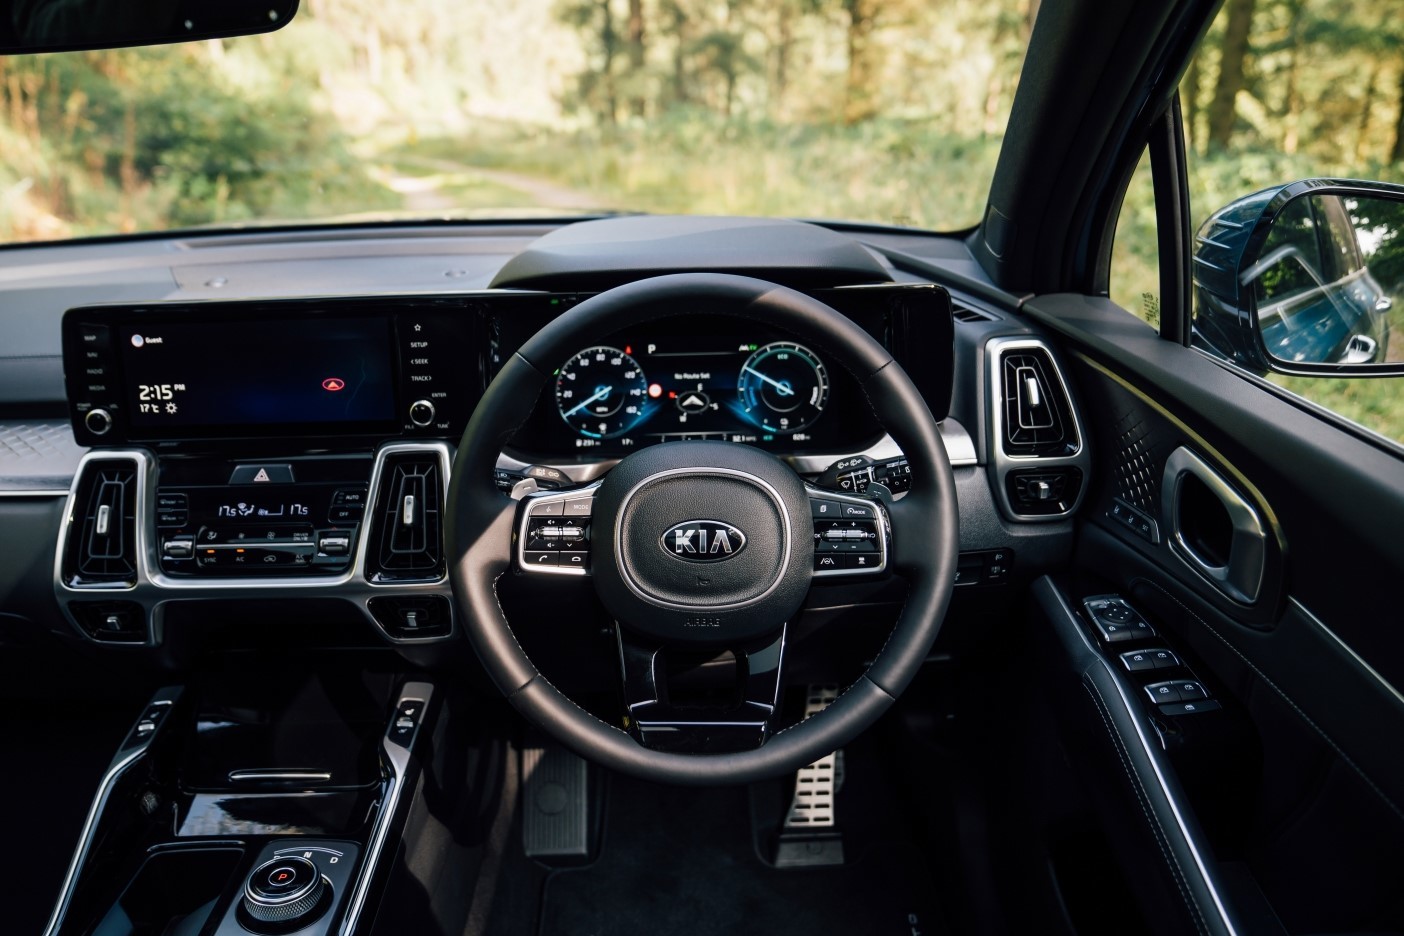 Inside the roomy cabin of the Kia Sorento, with all controls easy to get to